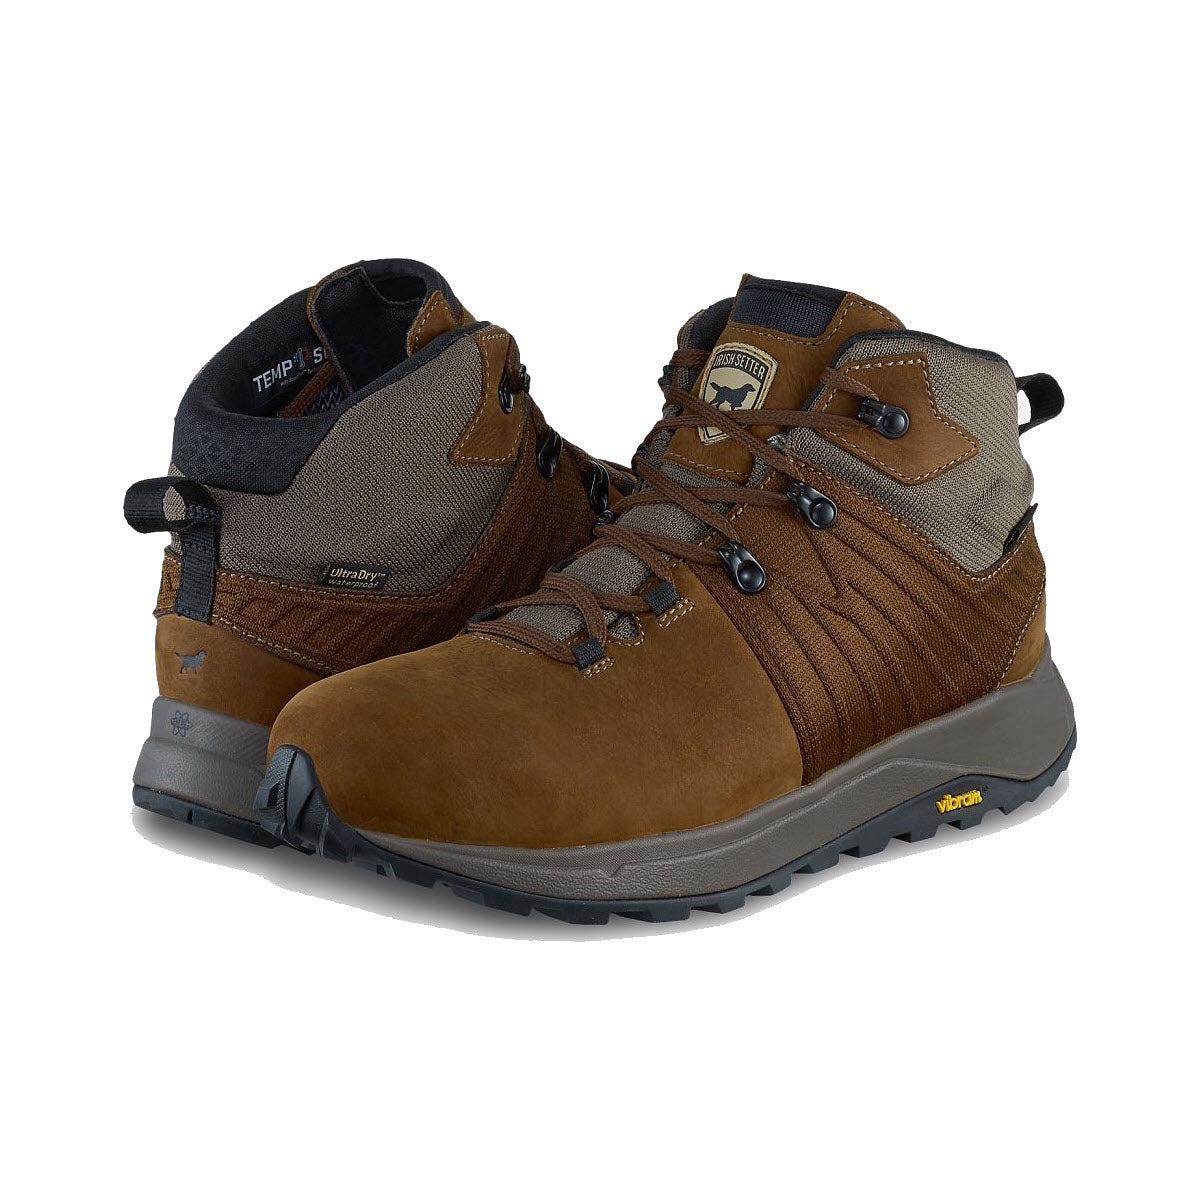 A pair of Irish Setter Cascade 5 Inch Safety Toe Boots in brown with black and gray accents, featuring an aluminum toe cap and rugged soles.